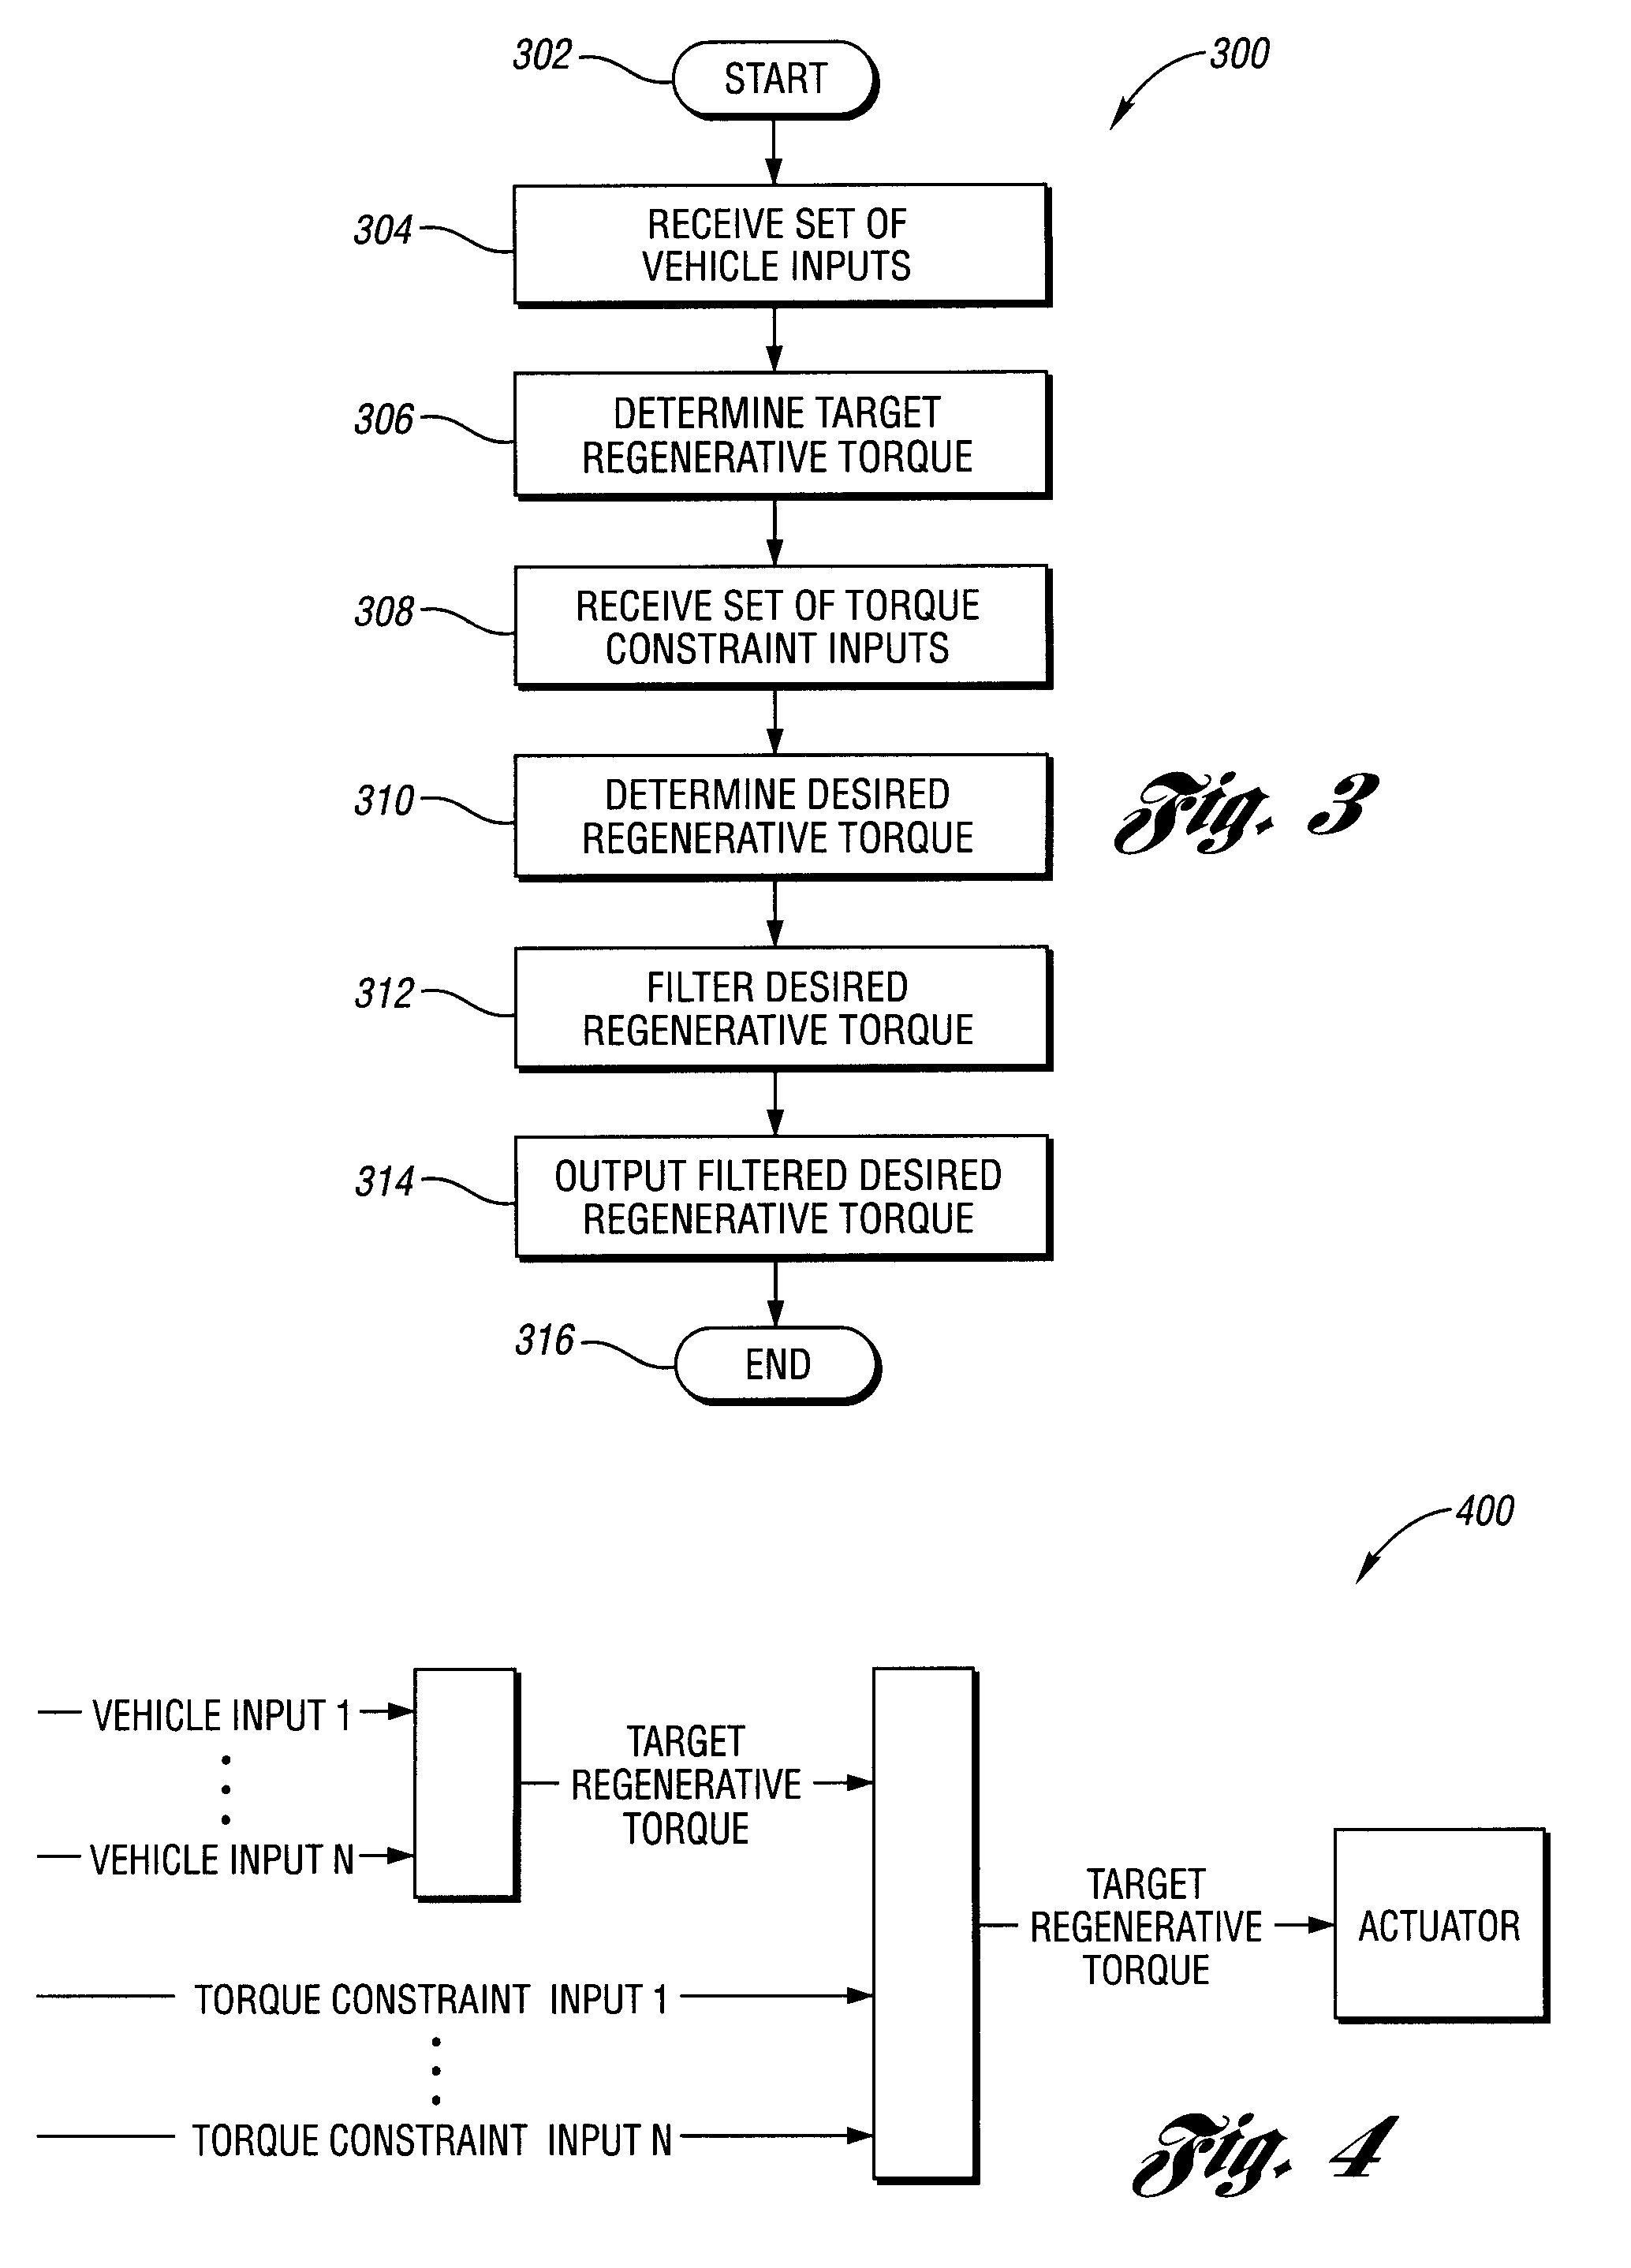 System and method for recovering regenerative power in a vehicle, and vehicle using the same